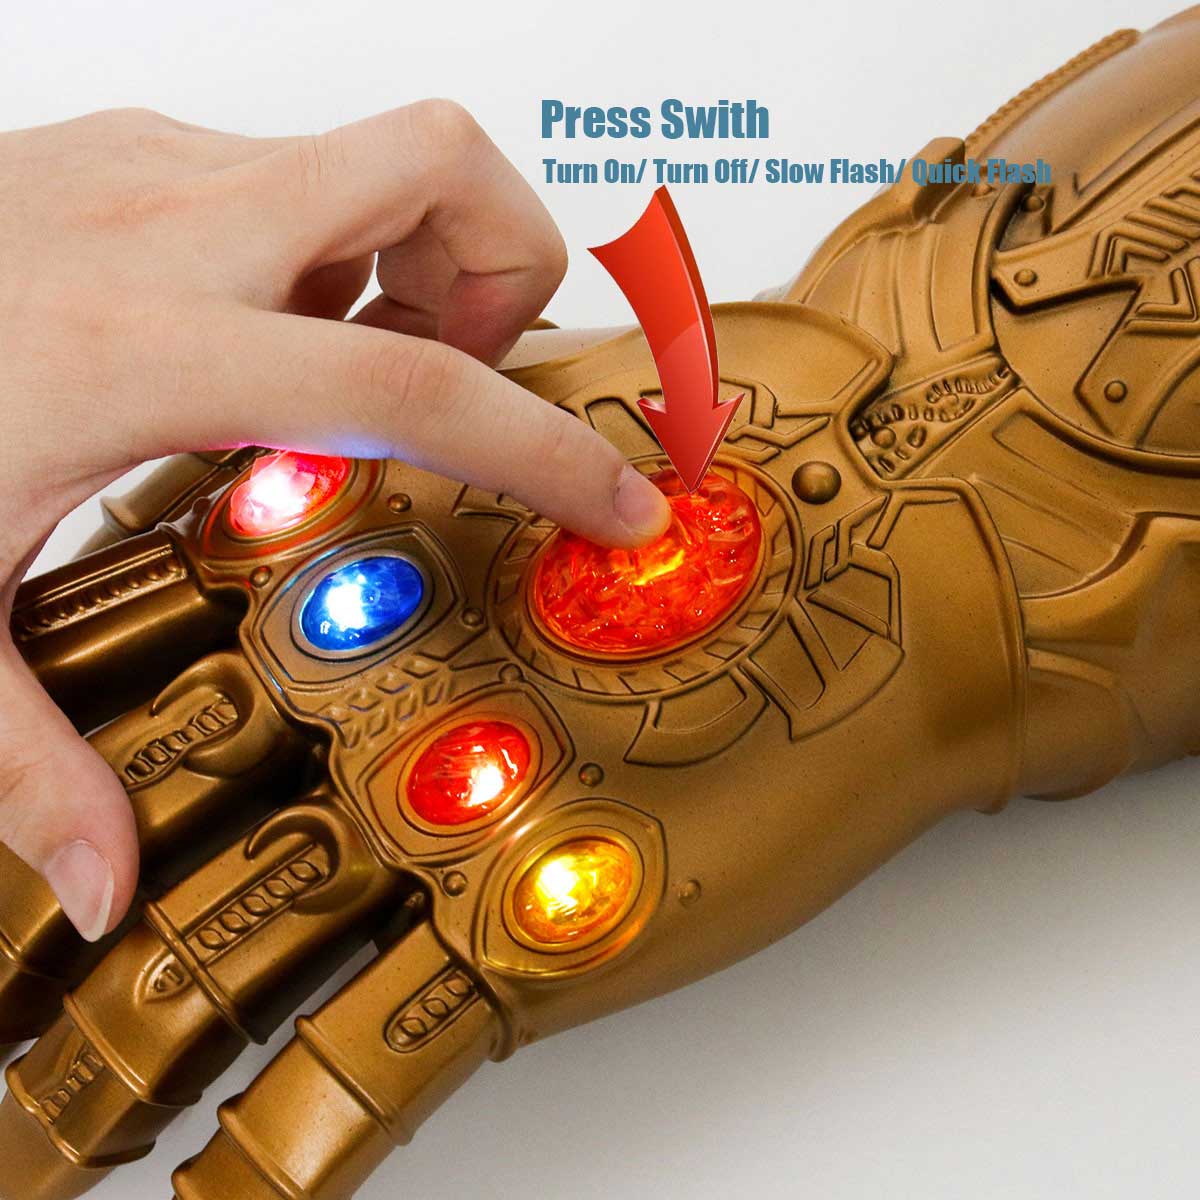 Avengers Infinity War Thanos Led Gloves Adult Light Up Gauntlet Halloween Gift Cosplay Props-Takerlama